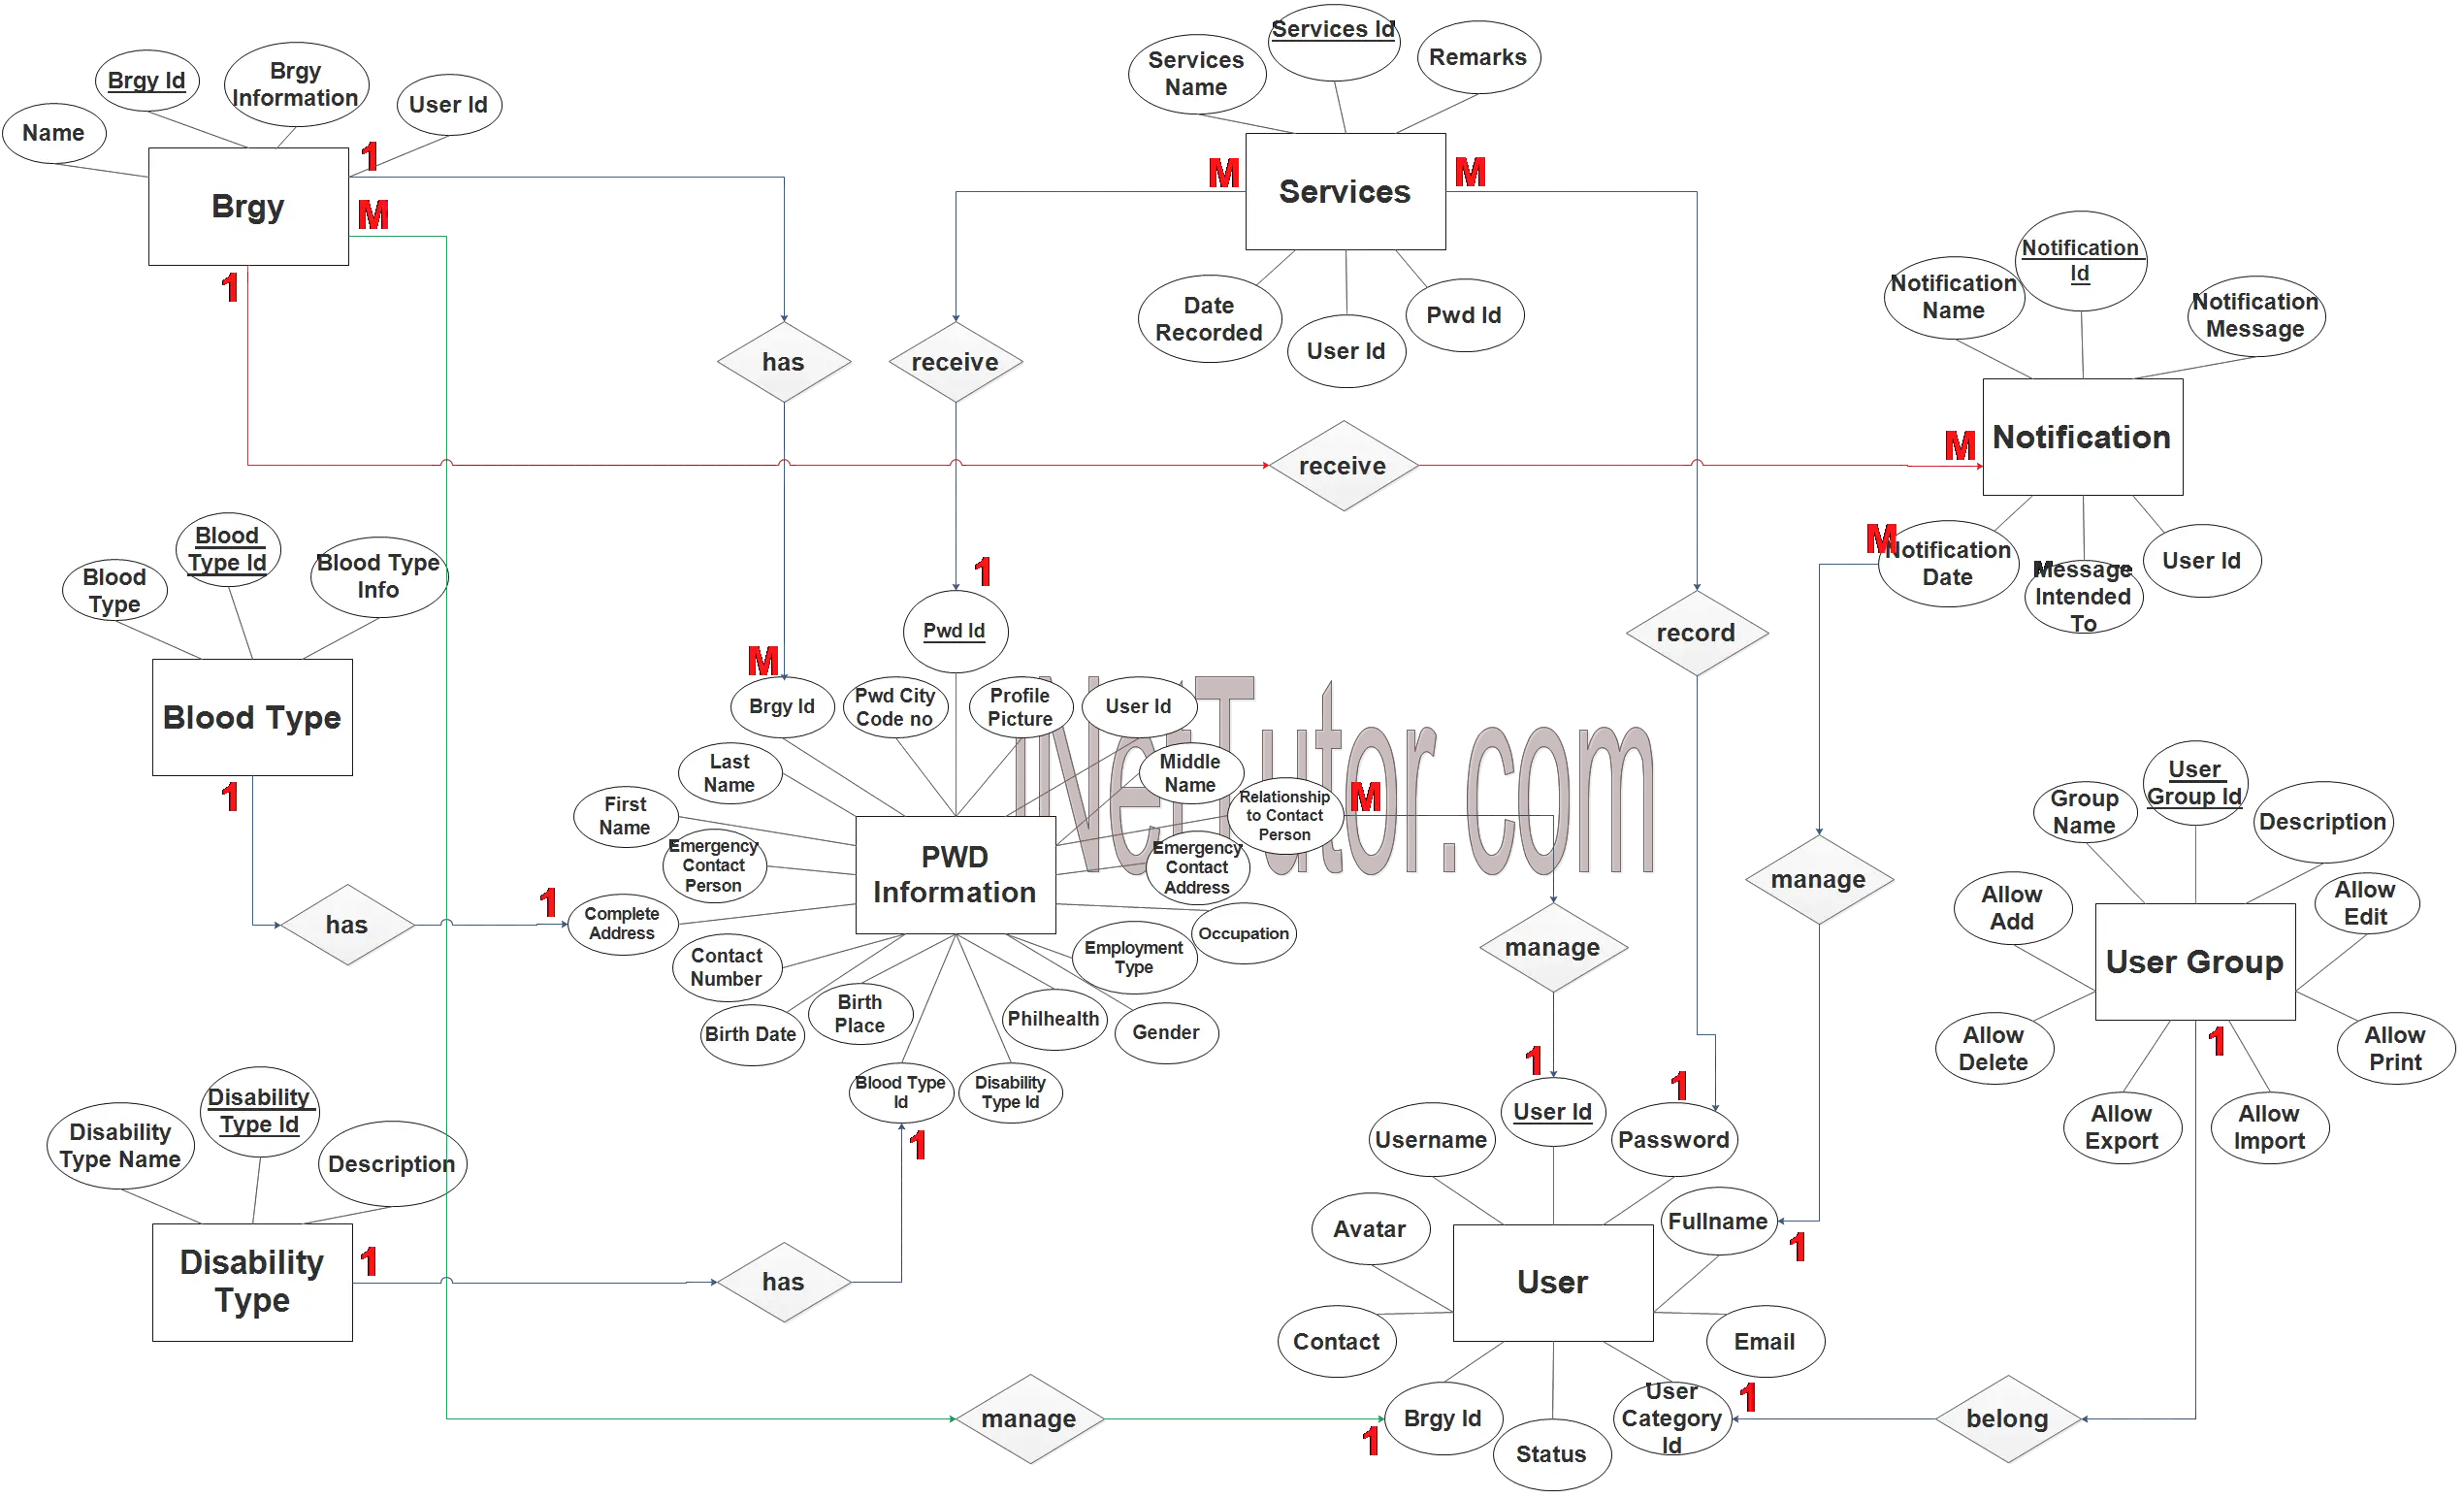 Person with Disability (PWD) Information System ER Diagram - Step 3 Complete ERD